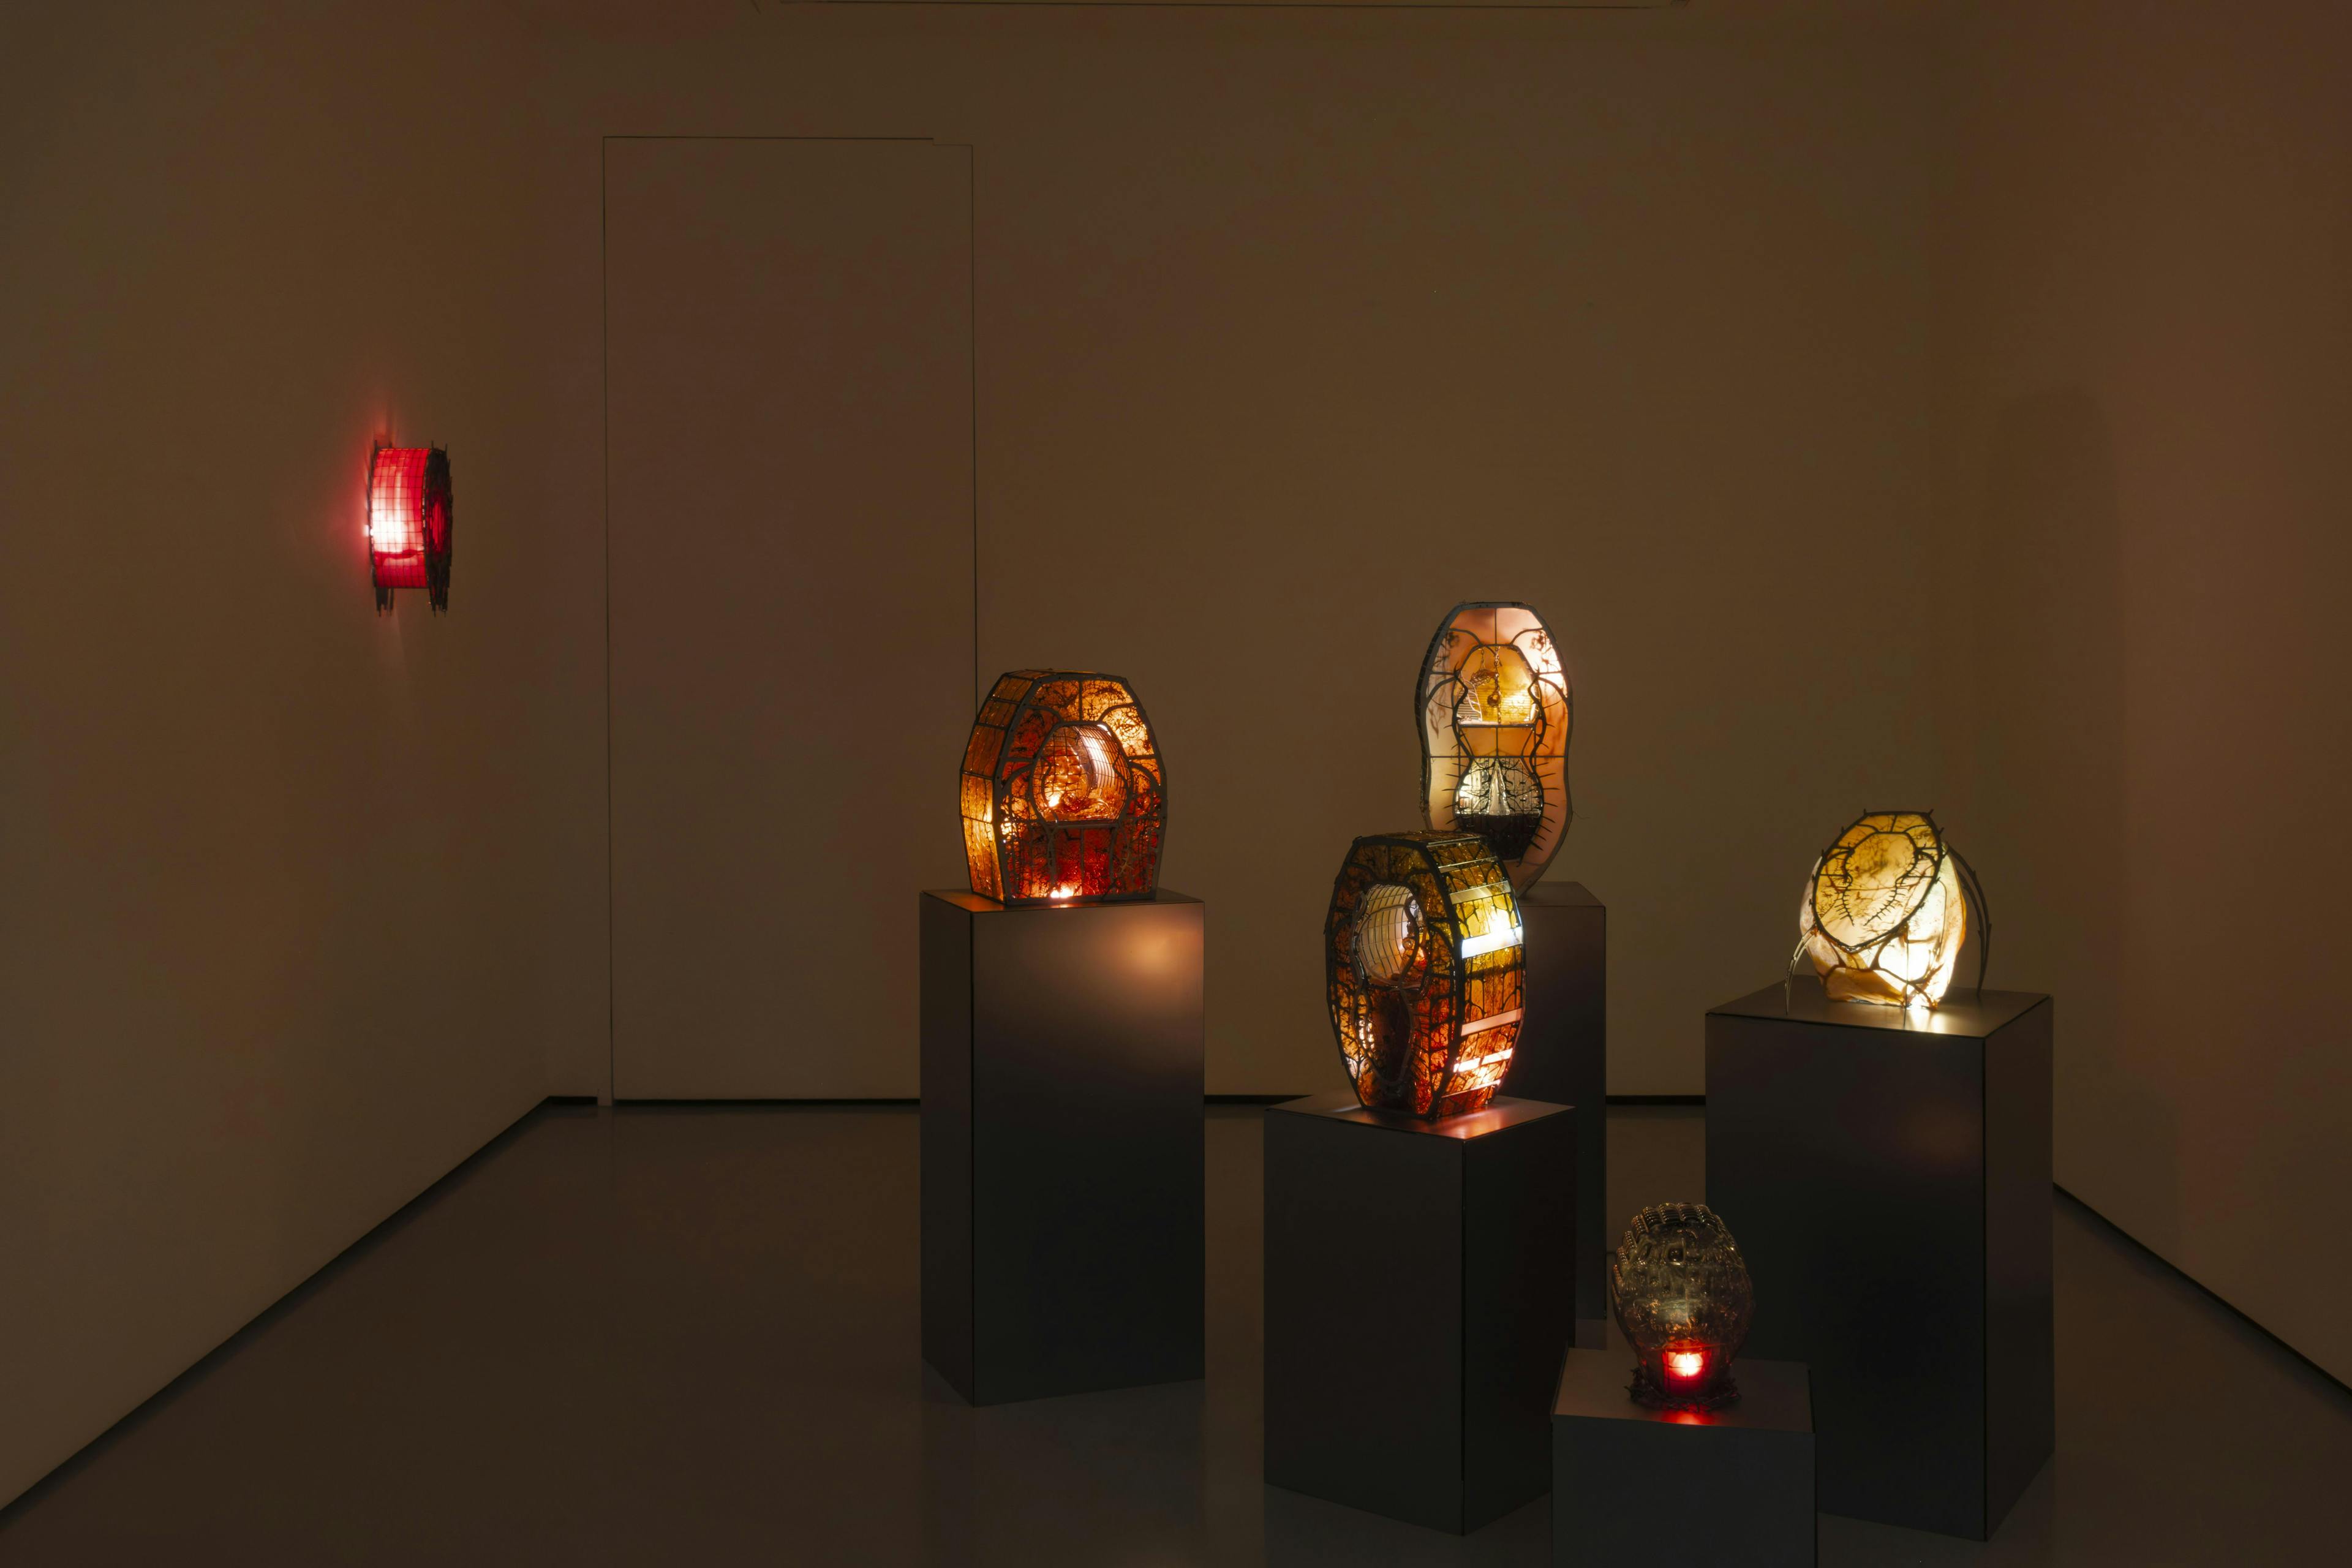 An installation view of Hazel Brill's exhibition featuring 5 glowing resin coloured sculptures on steel plinths